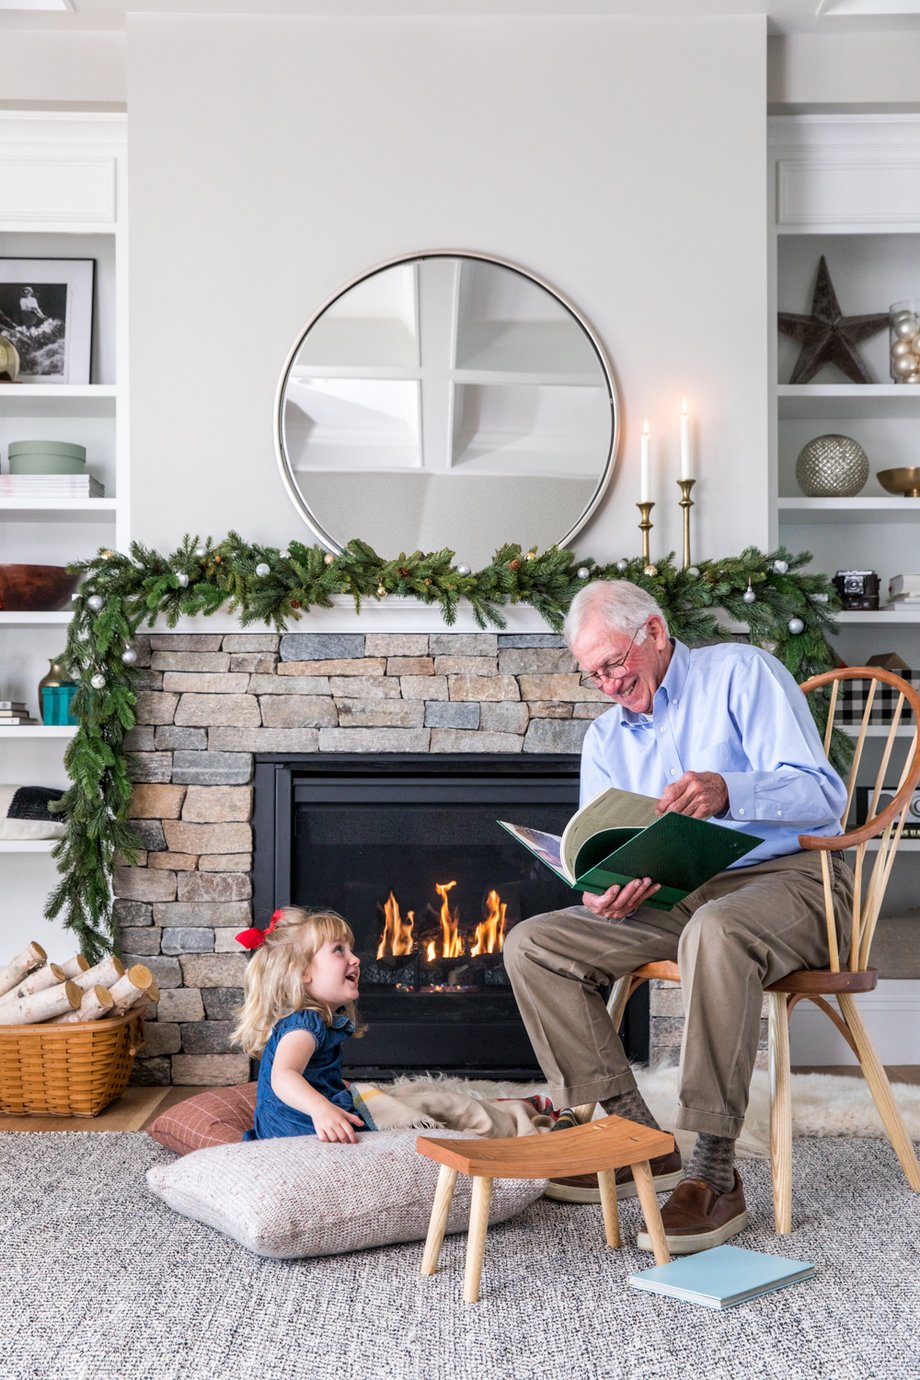 Erin Little photograph of a grandfather and granddaughter for Thos. Moser's furniture winter catalog.